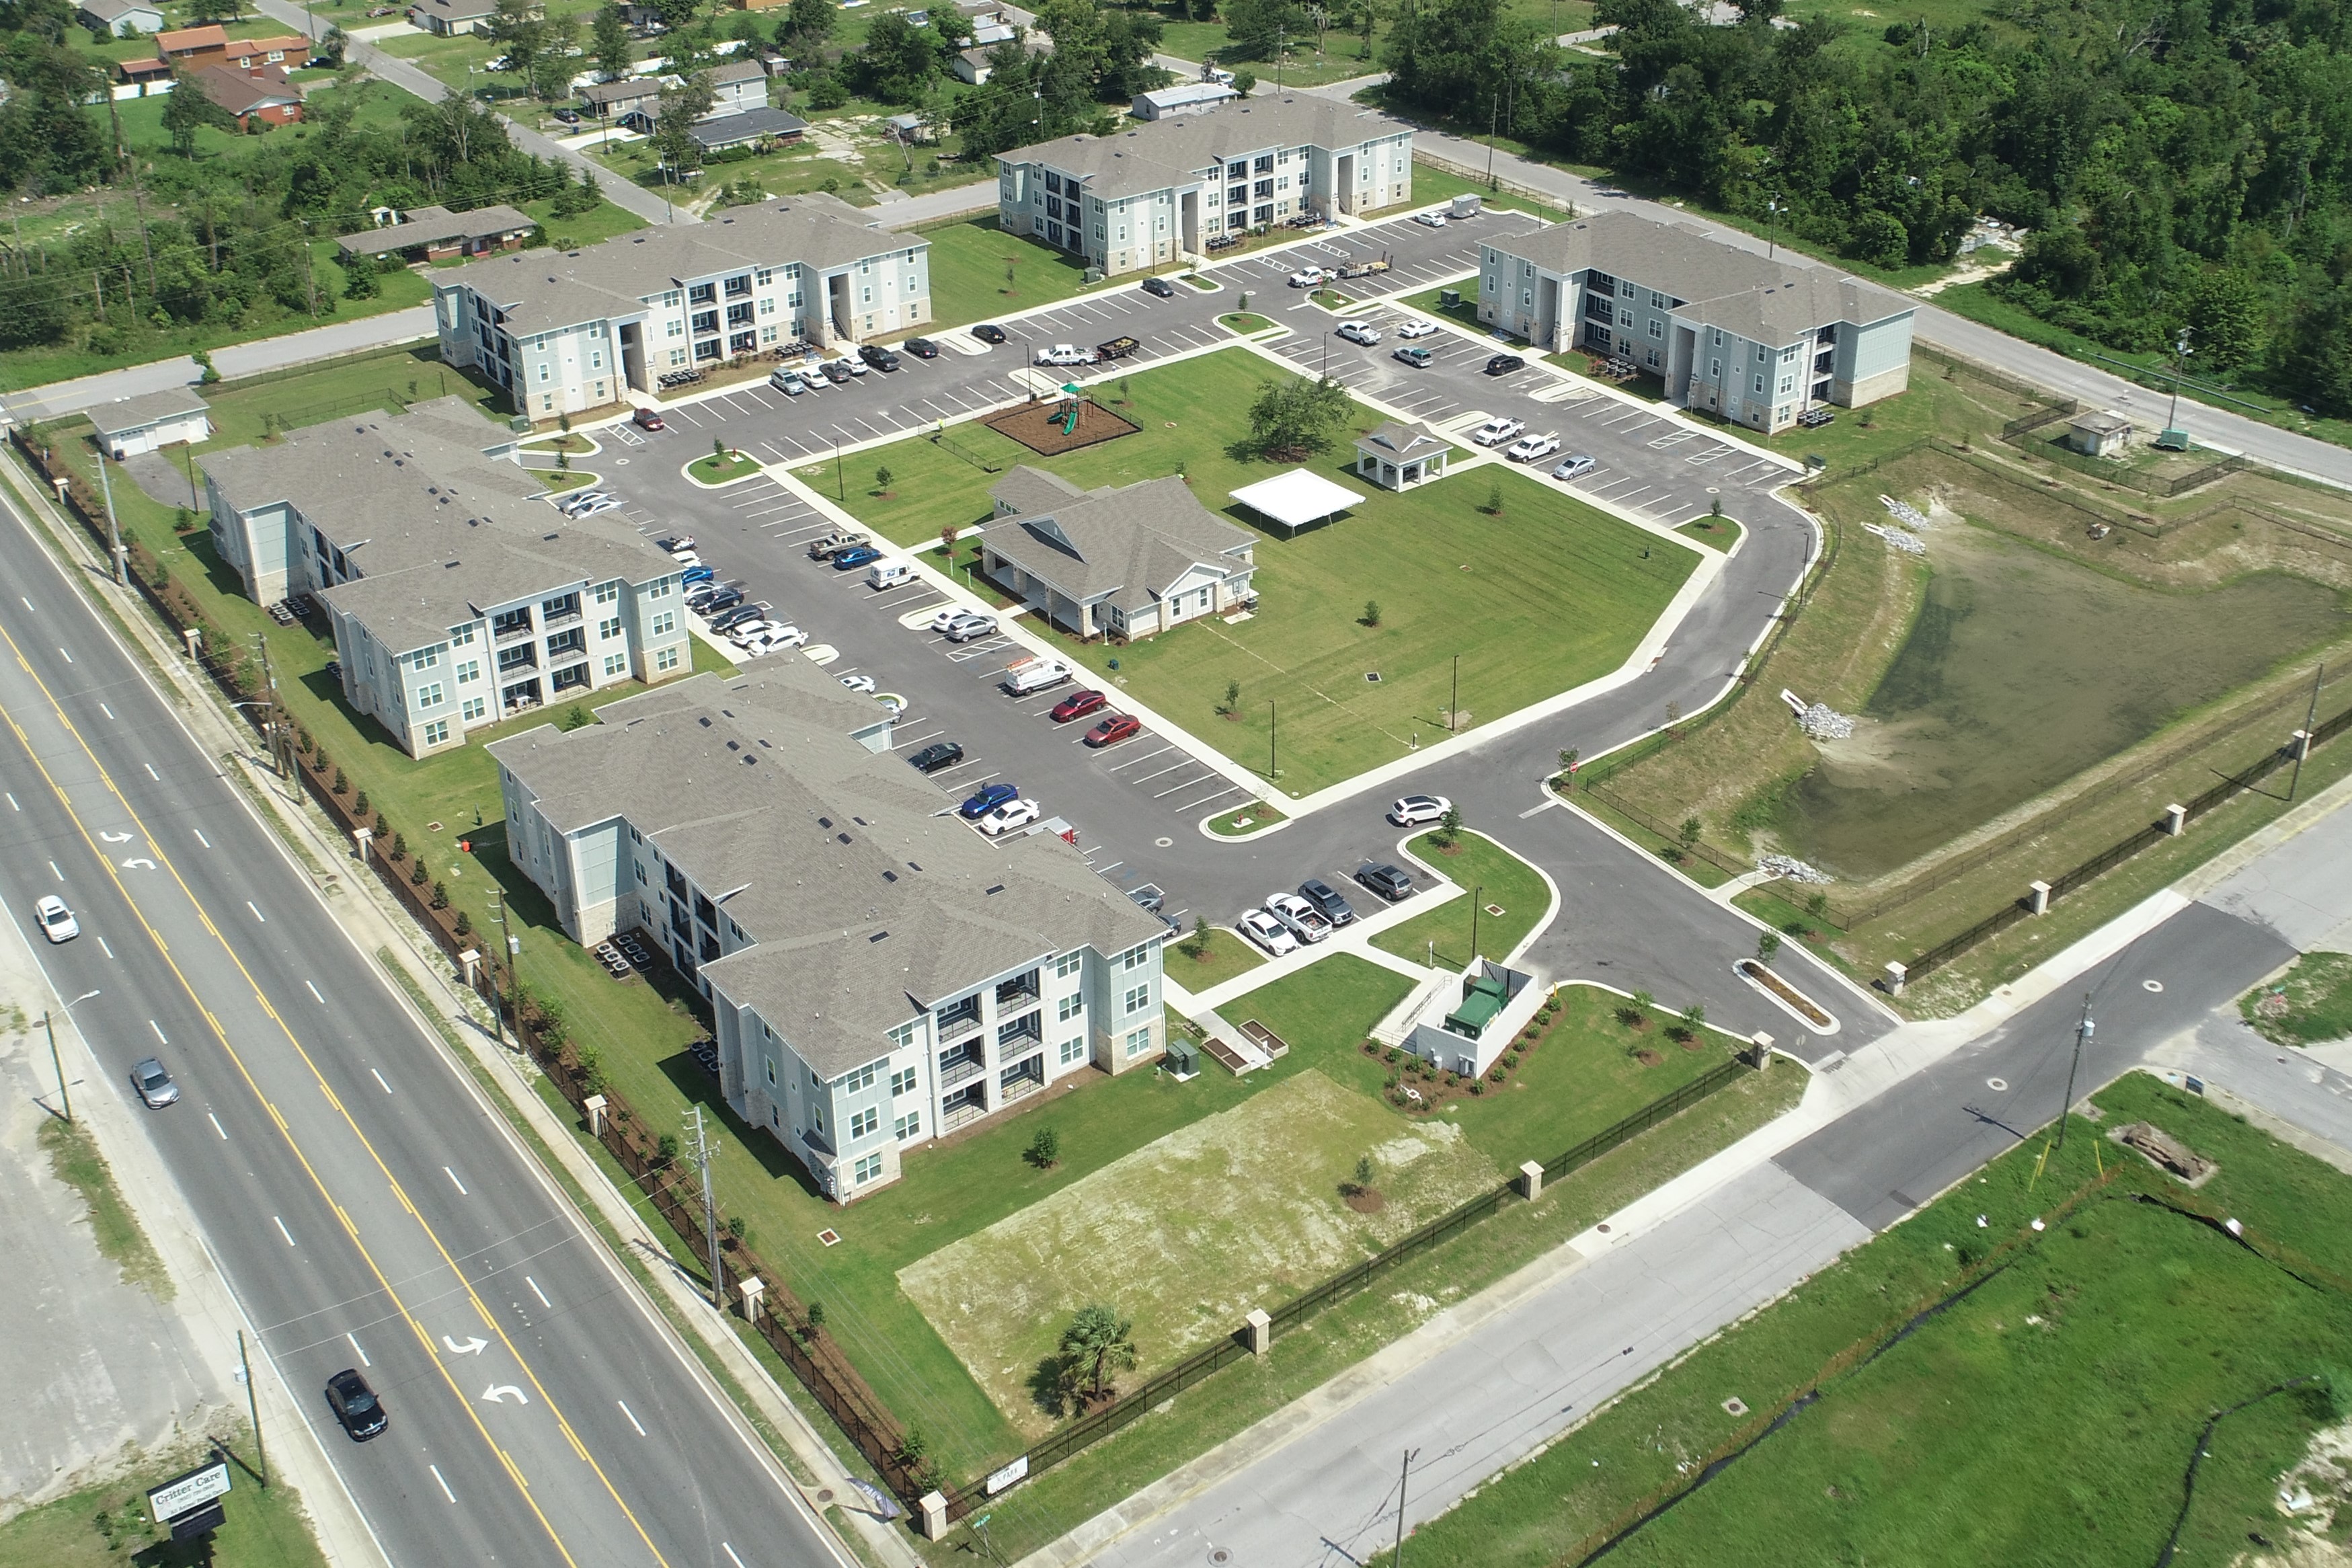 Image of The Park at Massalina apartment community from an aerial viewpoint